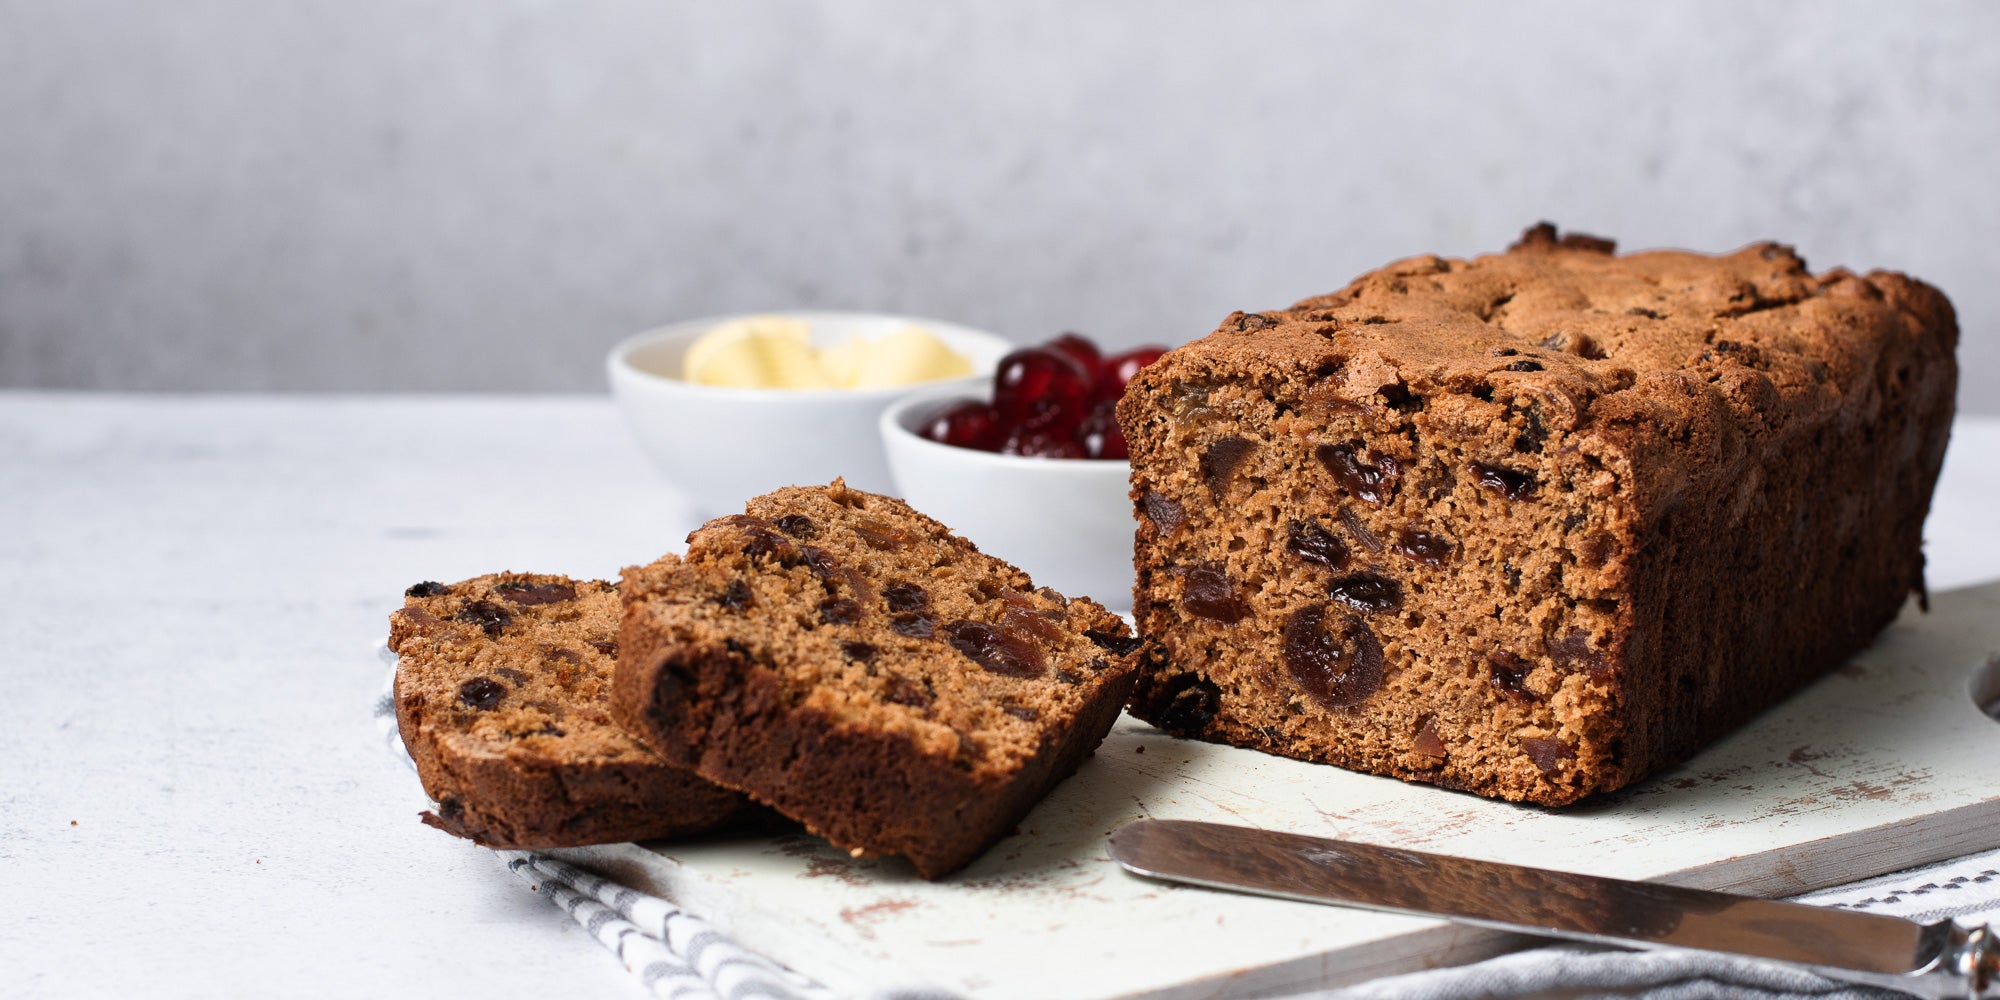 Irish tea loaf with two slices infront and pots of butter and cherries. Knife in shot